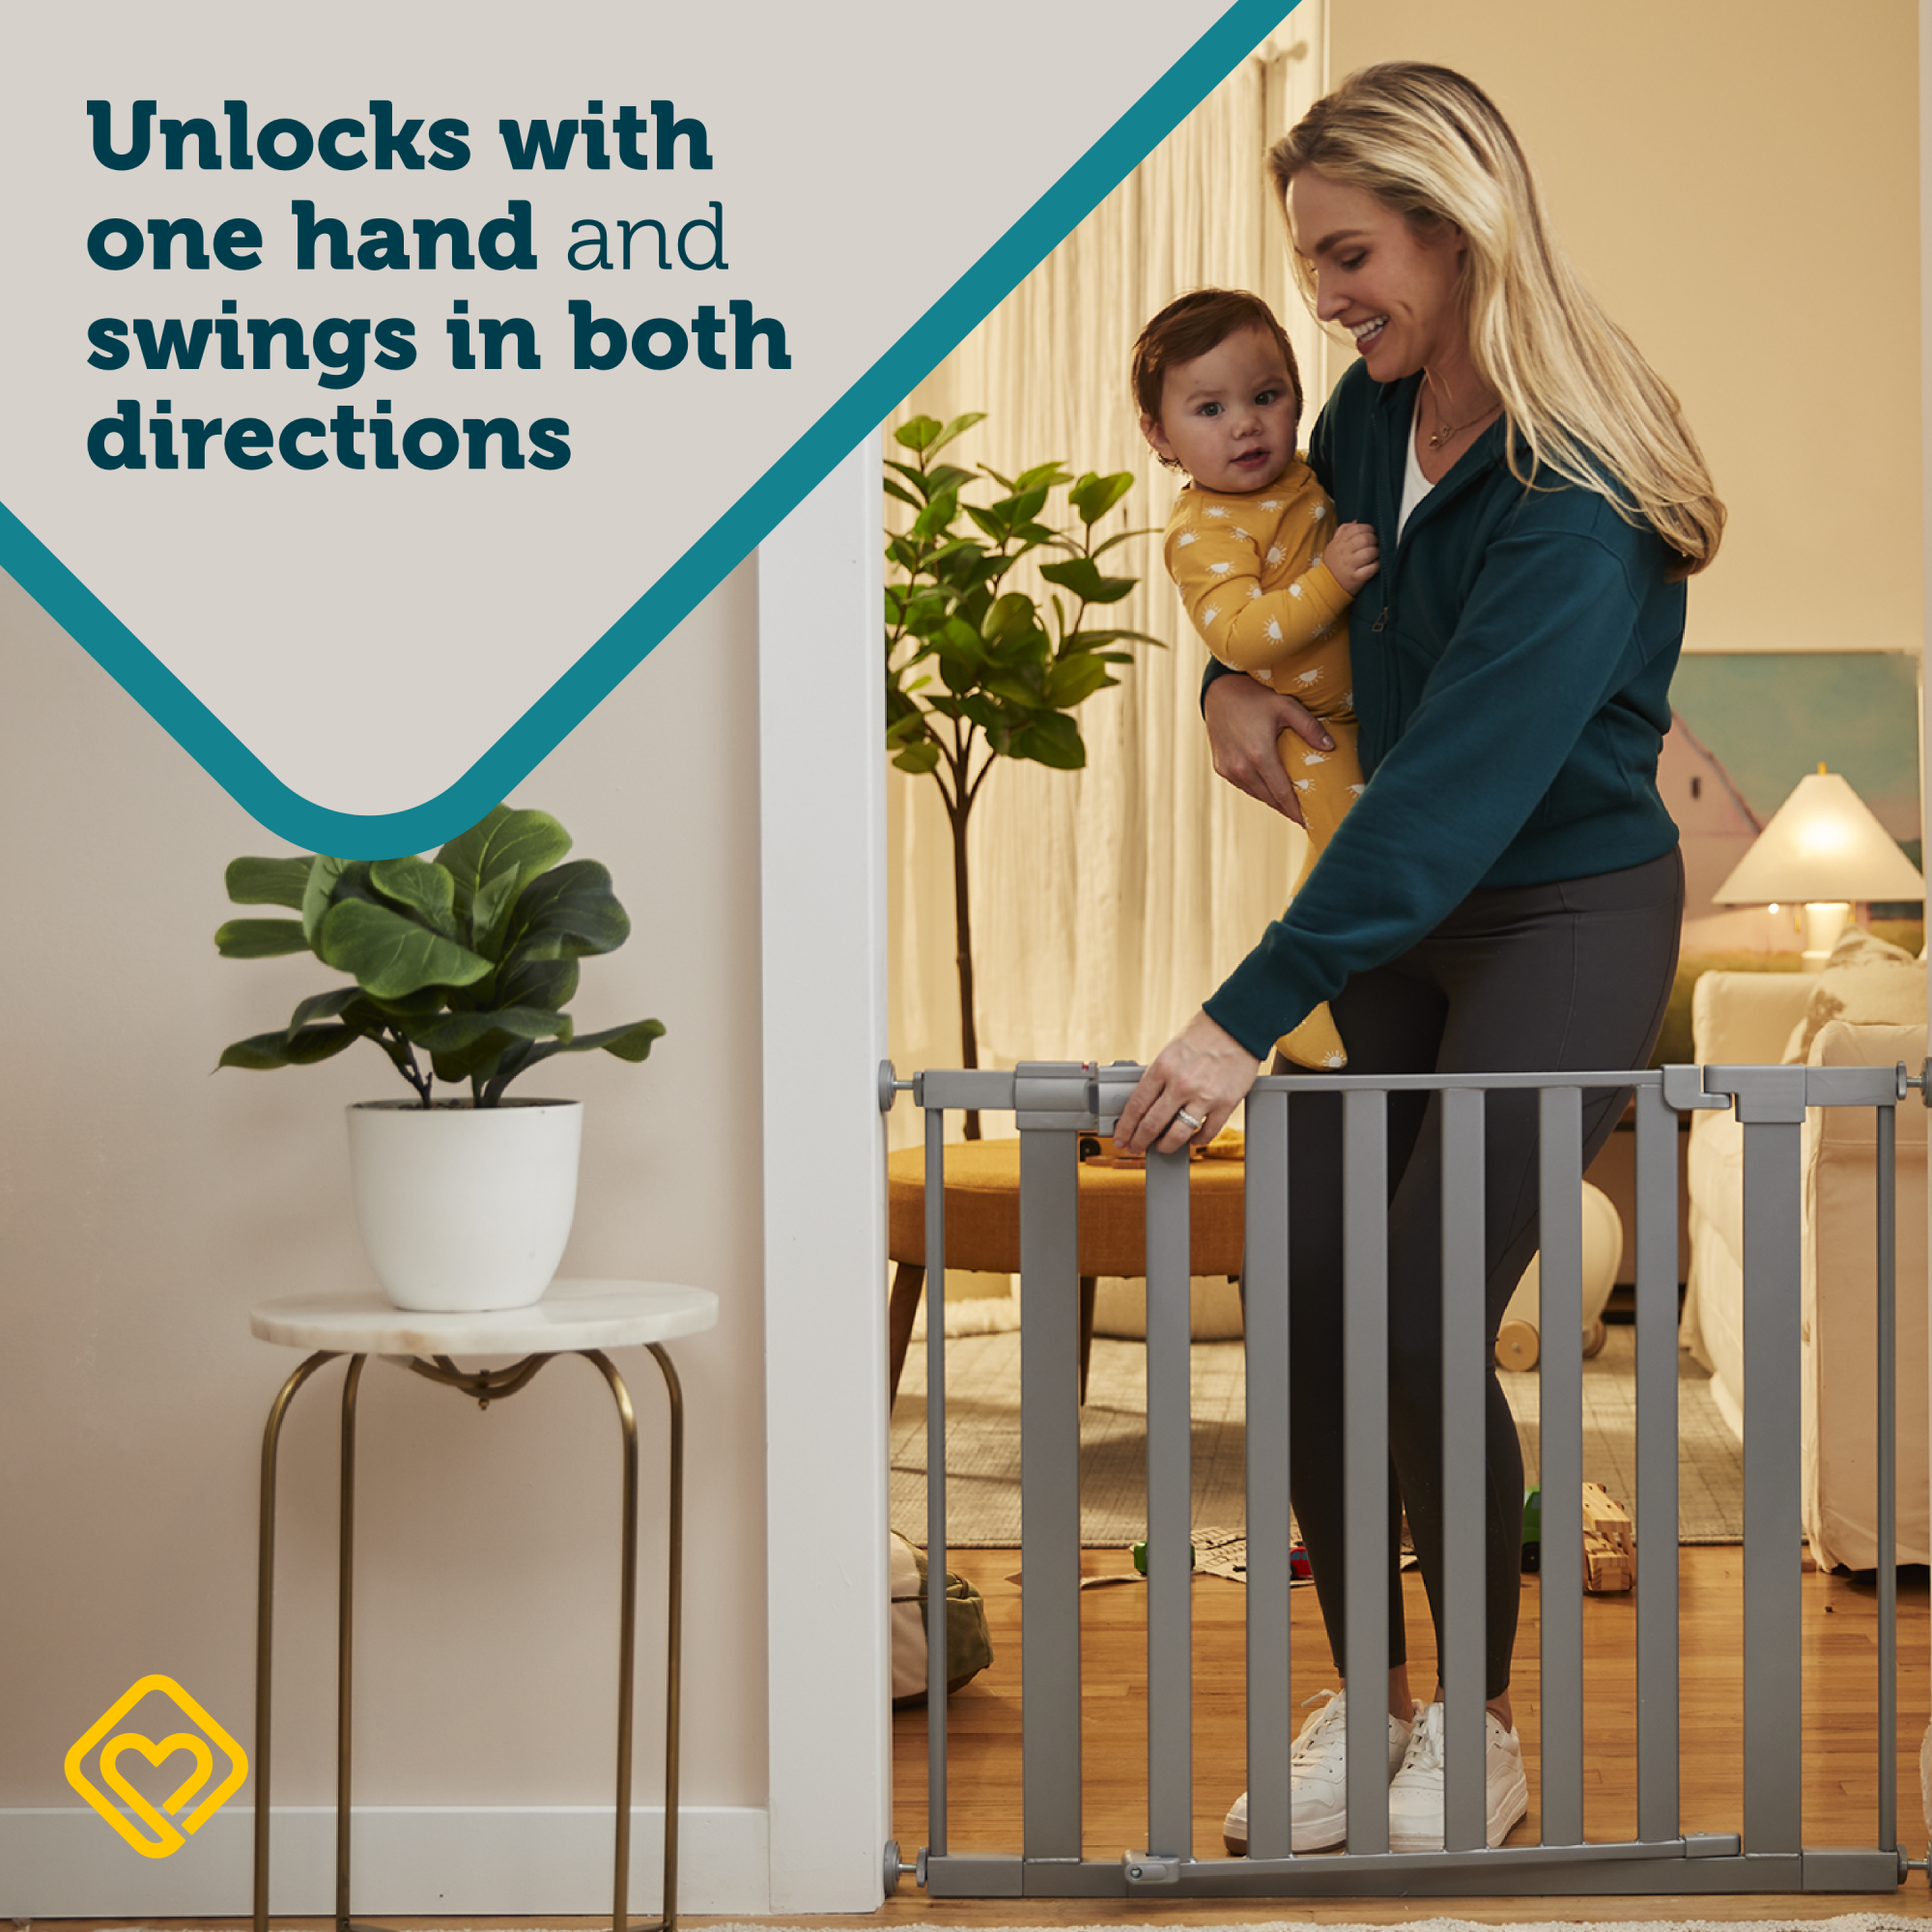 Modern Easy-Install Gate - unlocks with one hand and swings in both directions